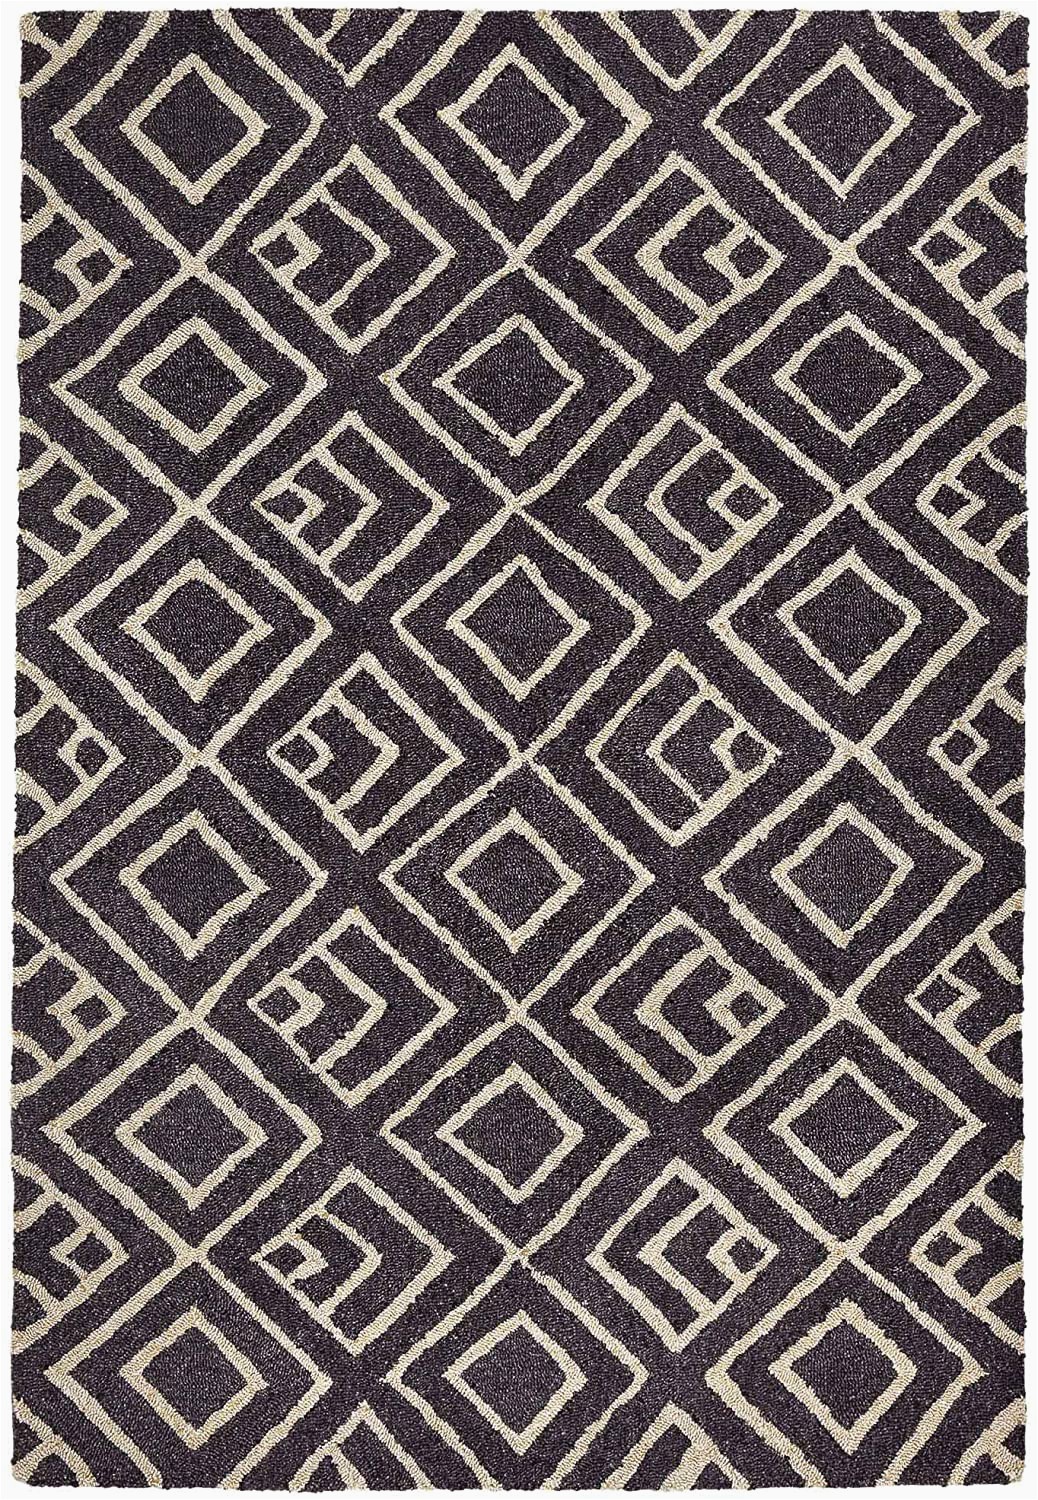 48 X 66 area Rug Liora Manne Wooster 6853 48 Kuba Charcoal area Rug 42 Inches